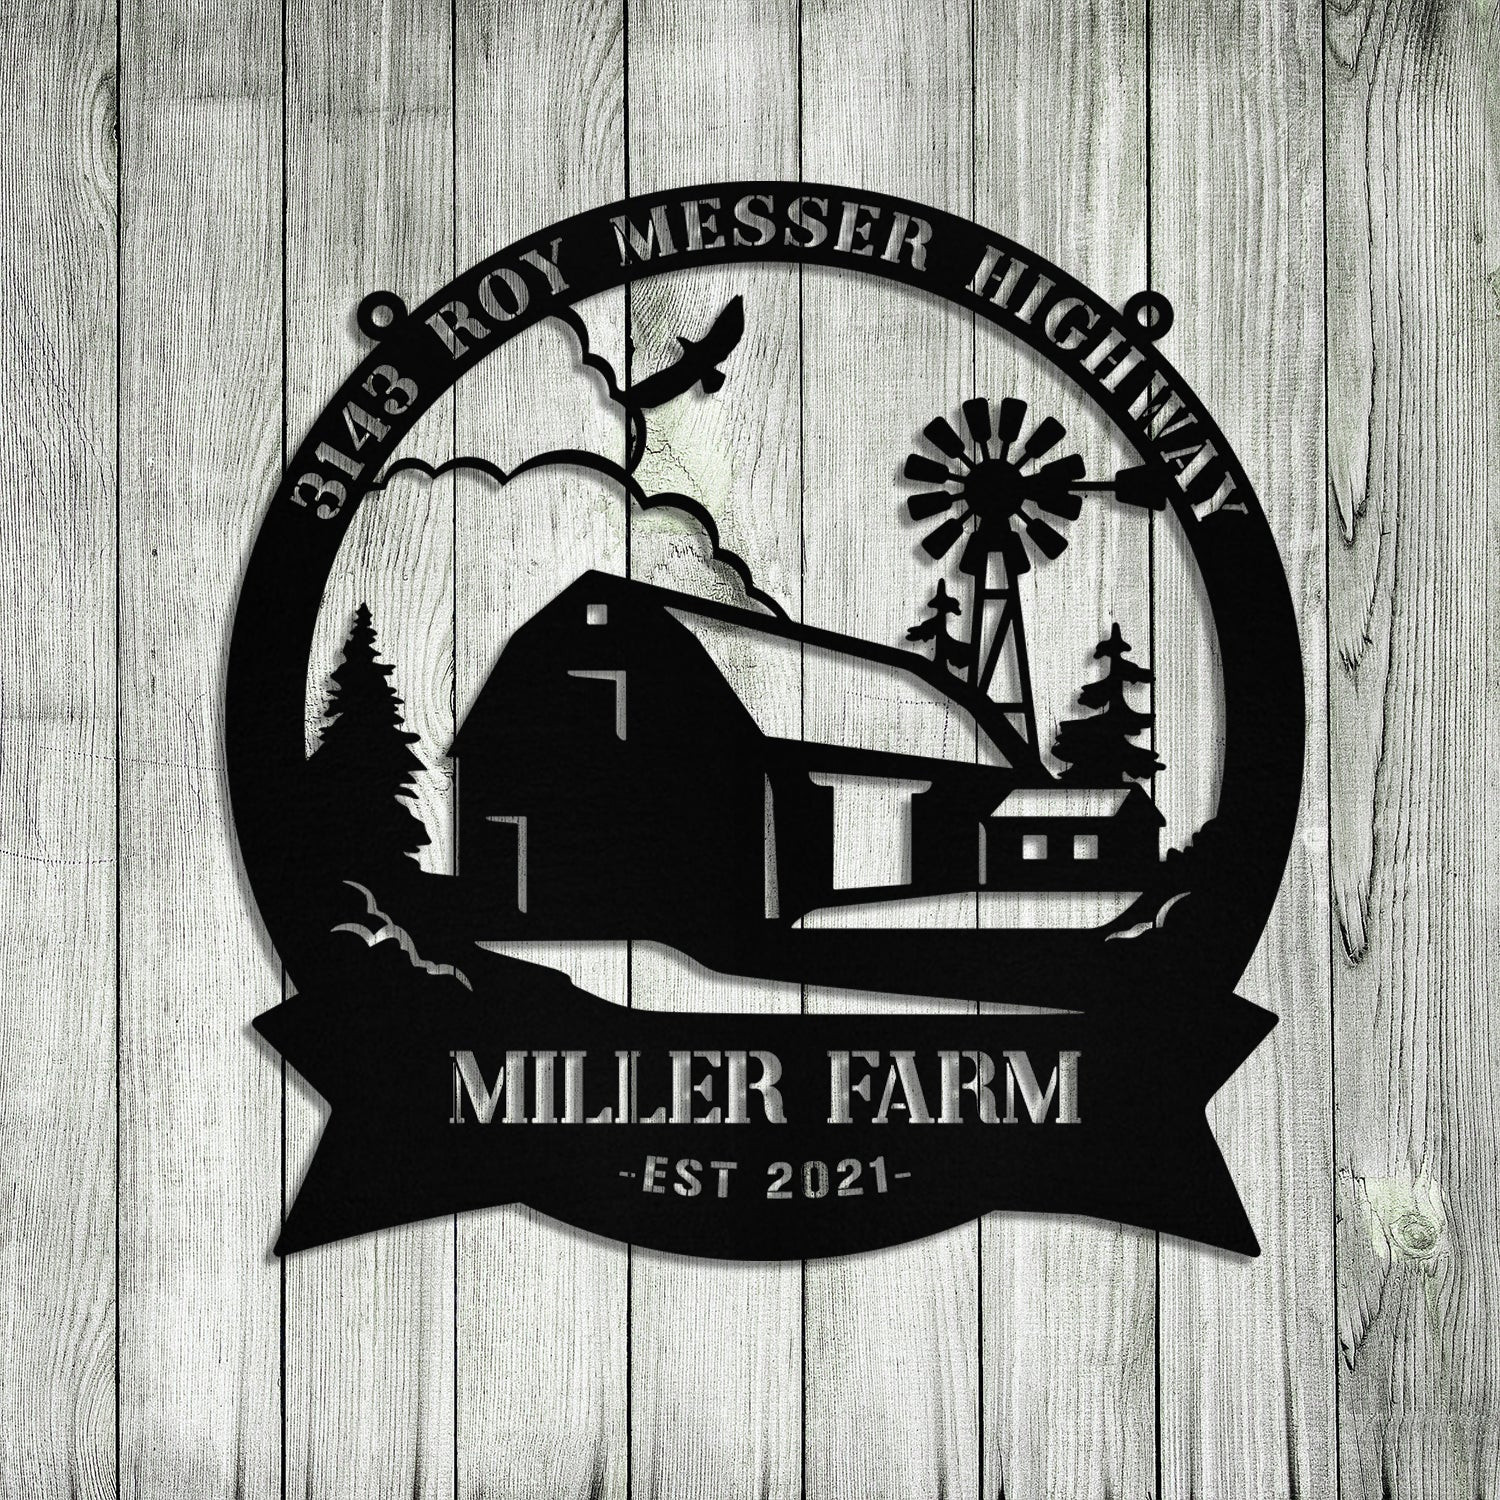 Personalized Metal Farm Sign Barn Windmill, Custom Outdoor, Entry Road, Front Gate, Metal Laser Cut Metal Signs Custom Gift Ideas 18x18IN